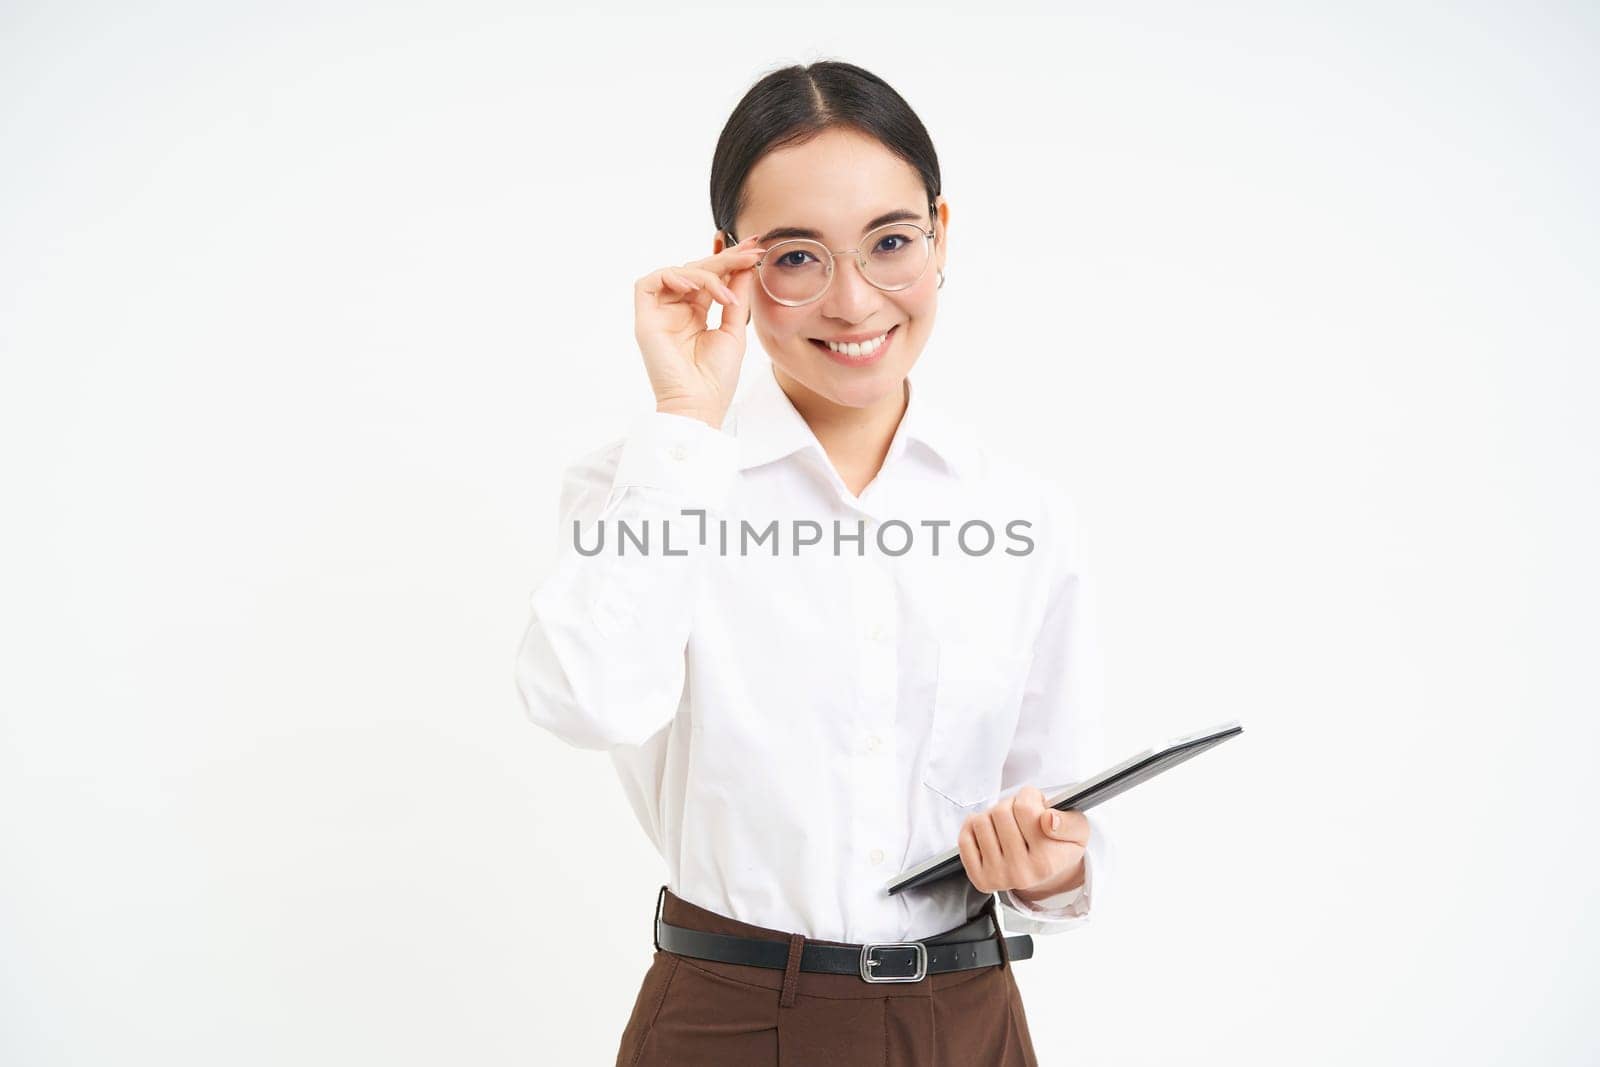 Asian woman professional, businesswoman in glasses, holding digital tablet, standing confident against white background.